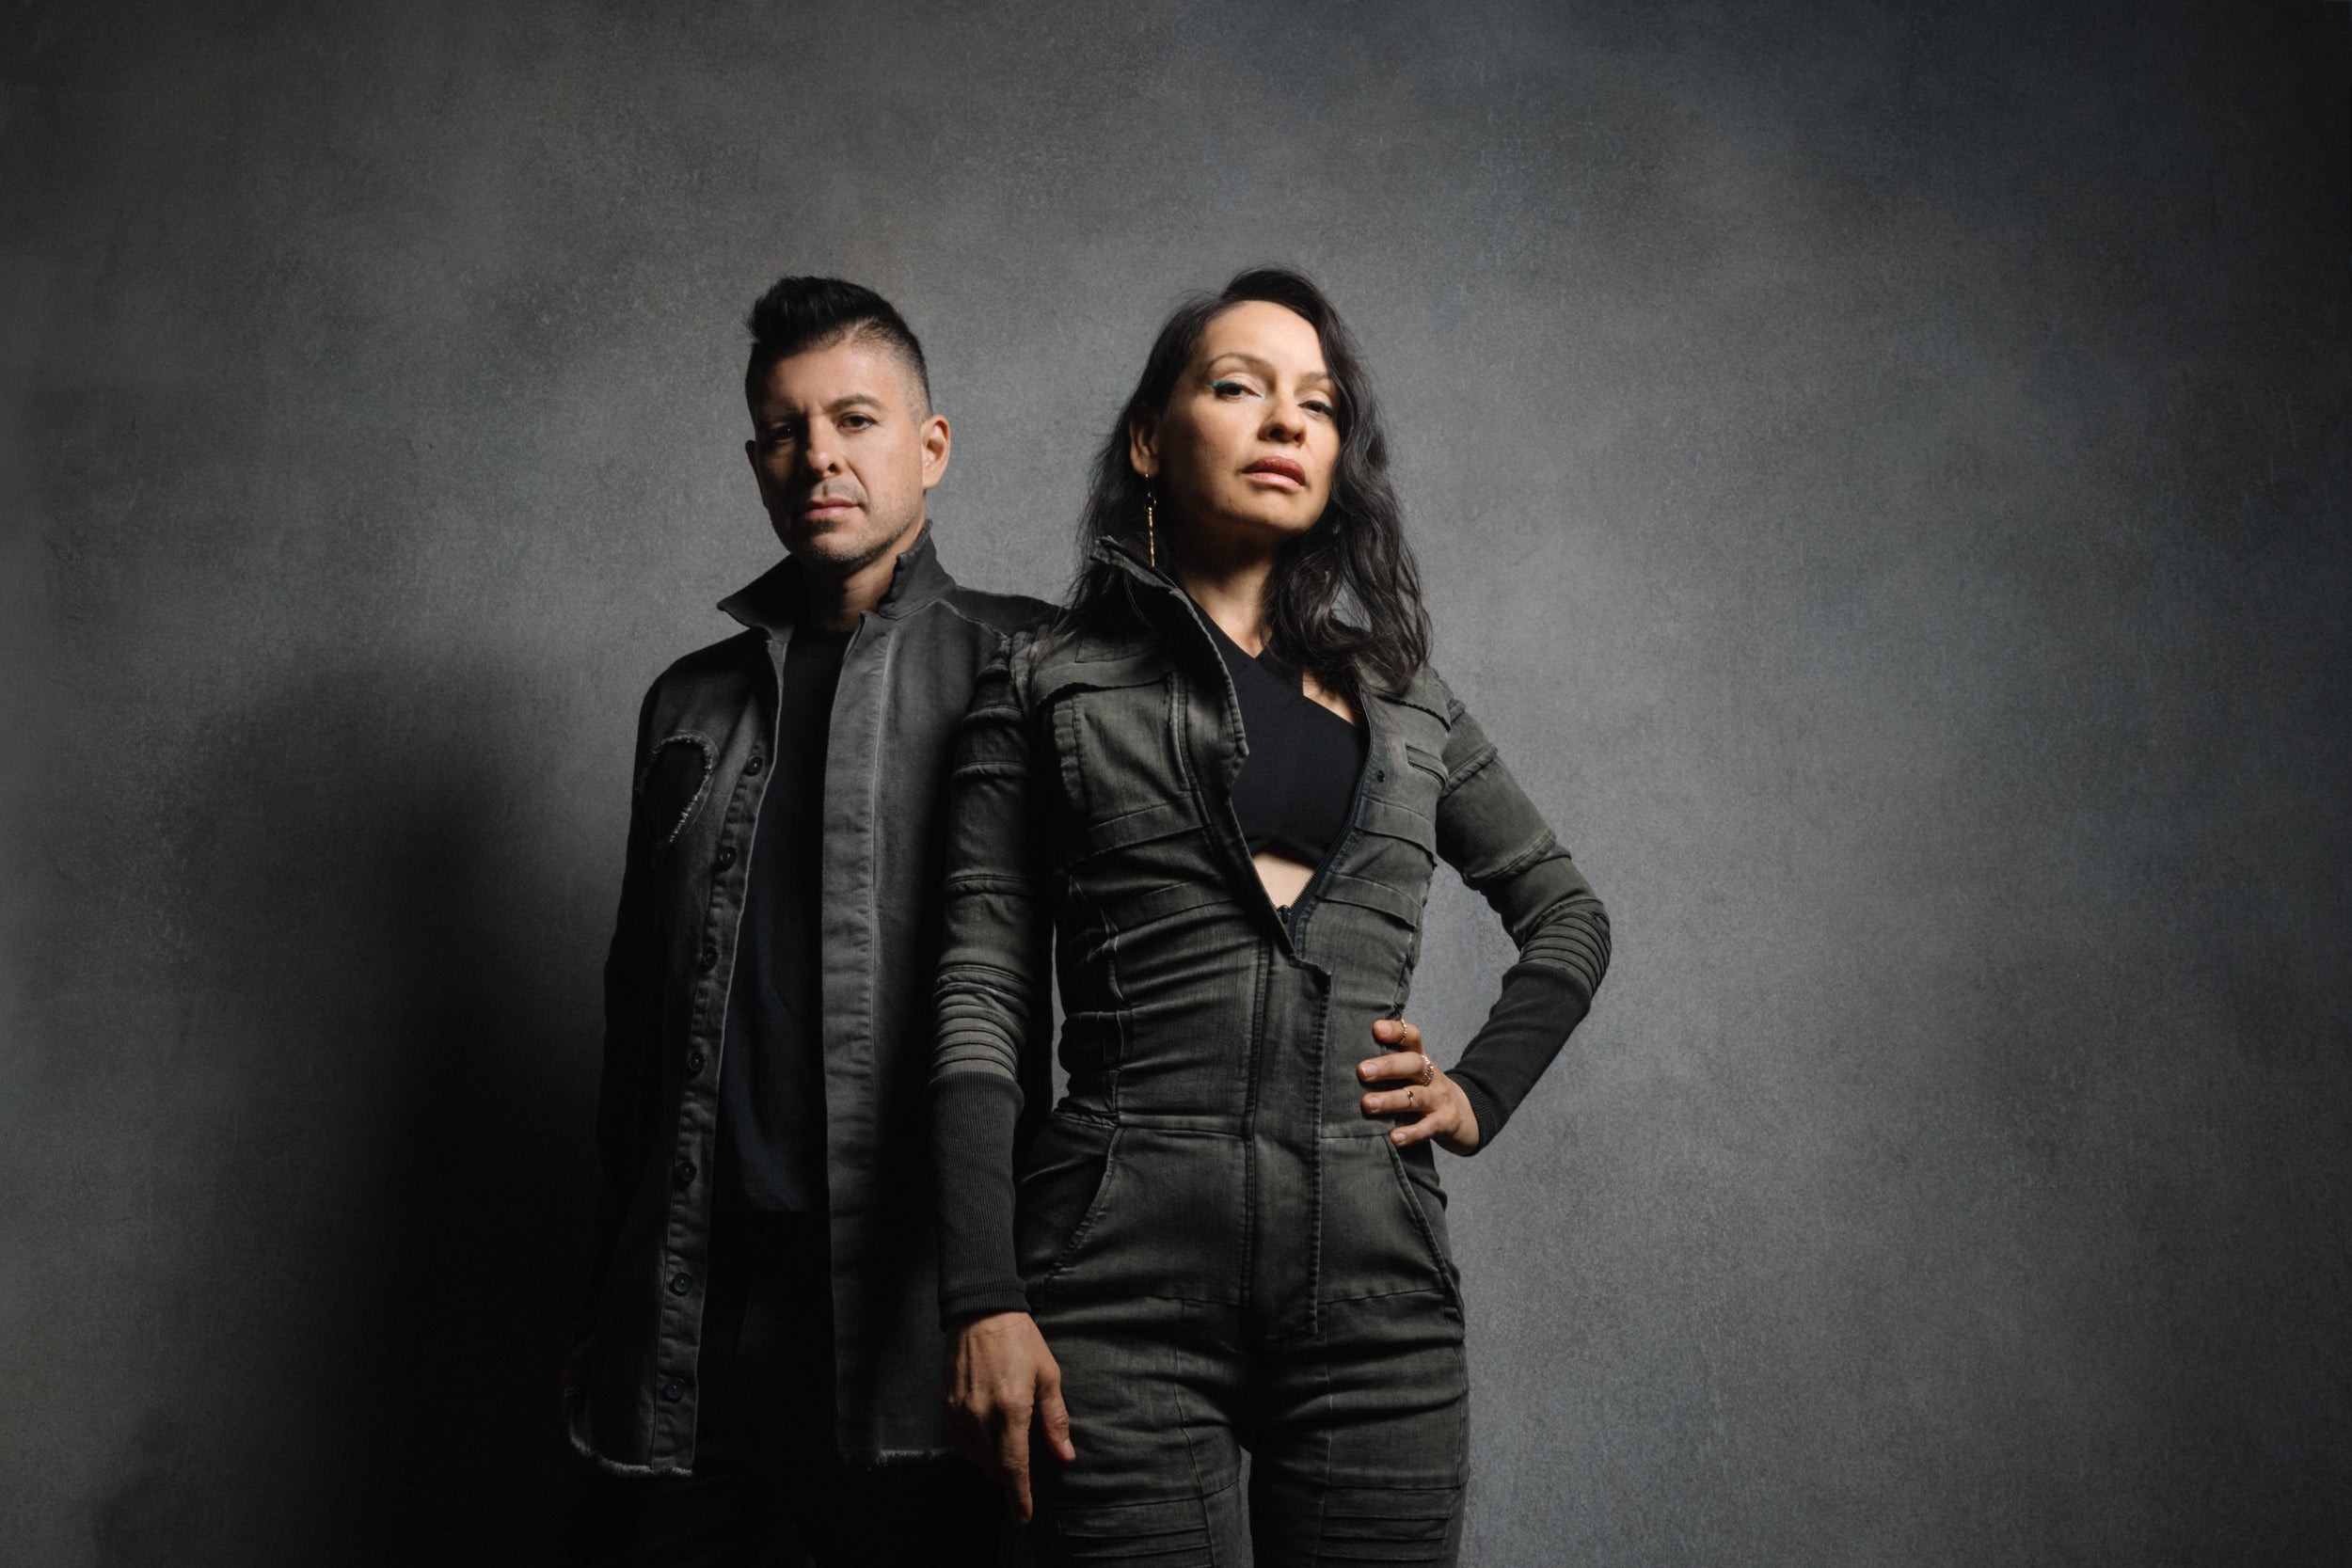 Image used with permission from Ticketmaster | Rodrigo Y Gabriela - In Between Thoughts...a New World Tour 2023 - VIP tickets